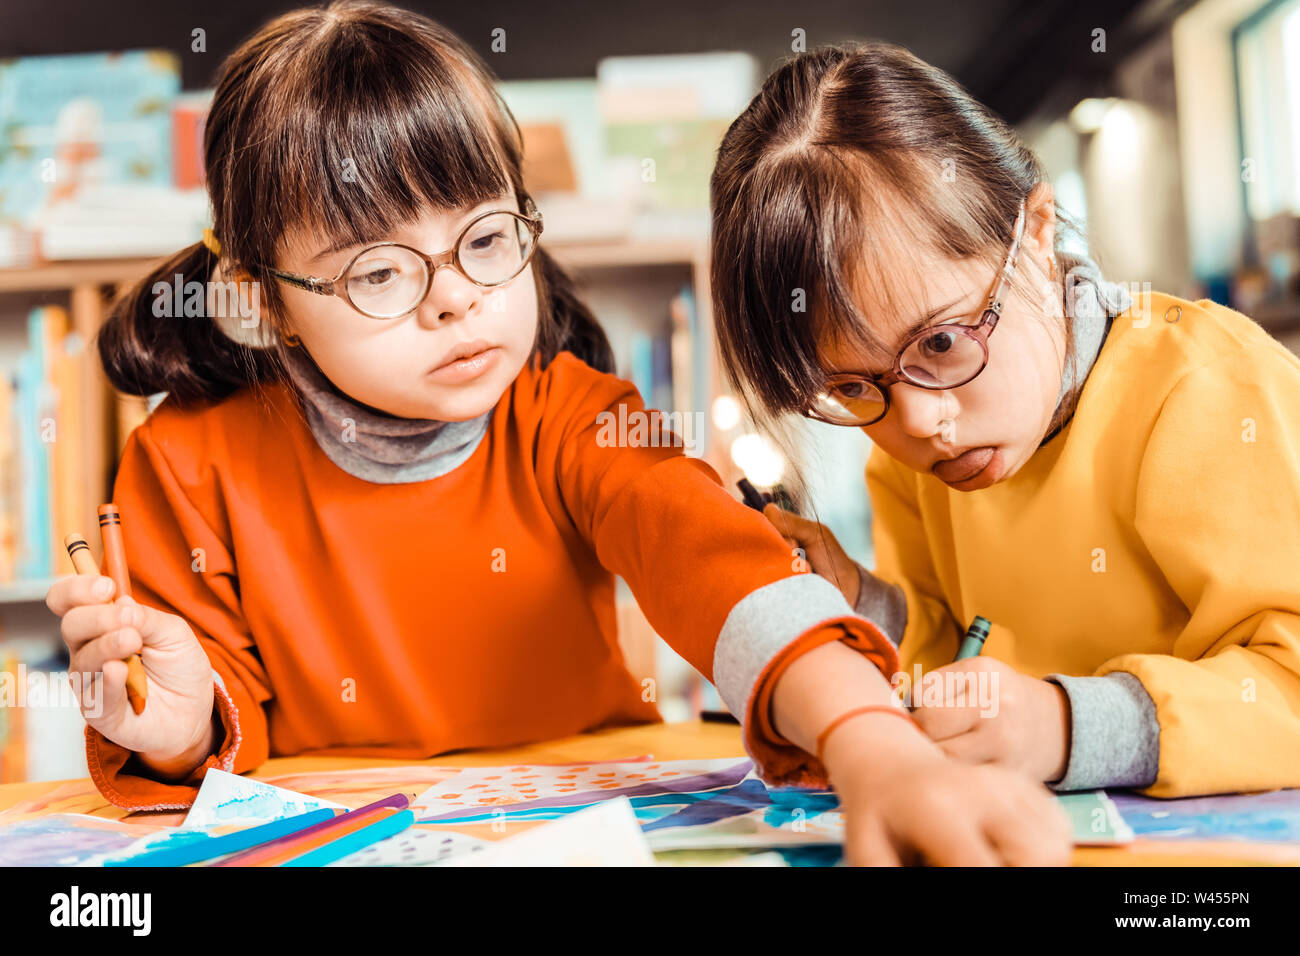 Curious dark-haired girl in eyeglasses taking new color of pencil Stock Photo